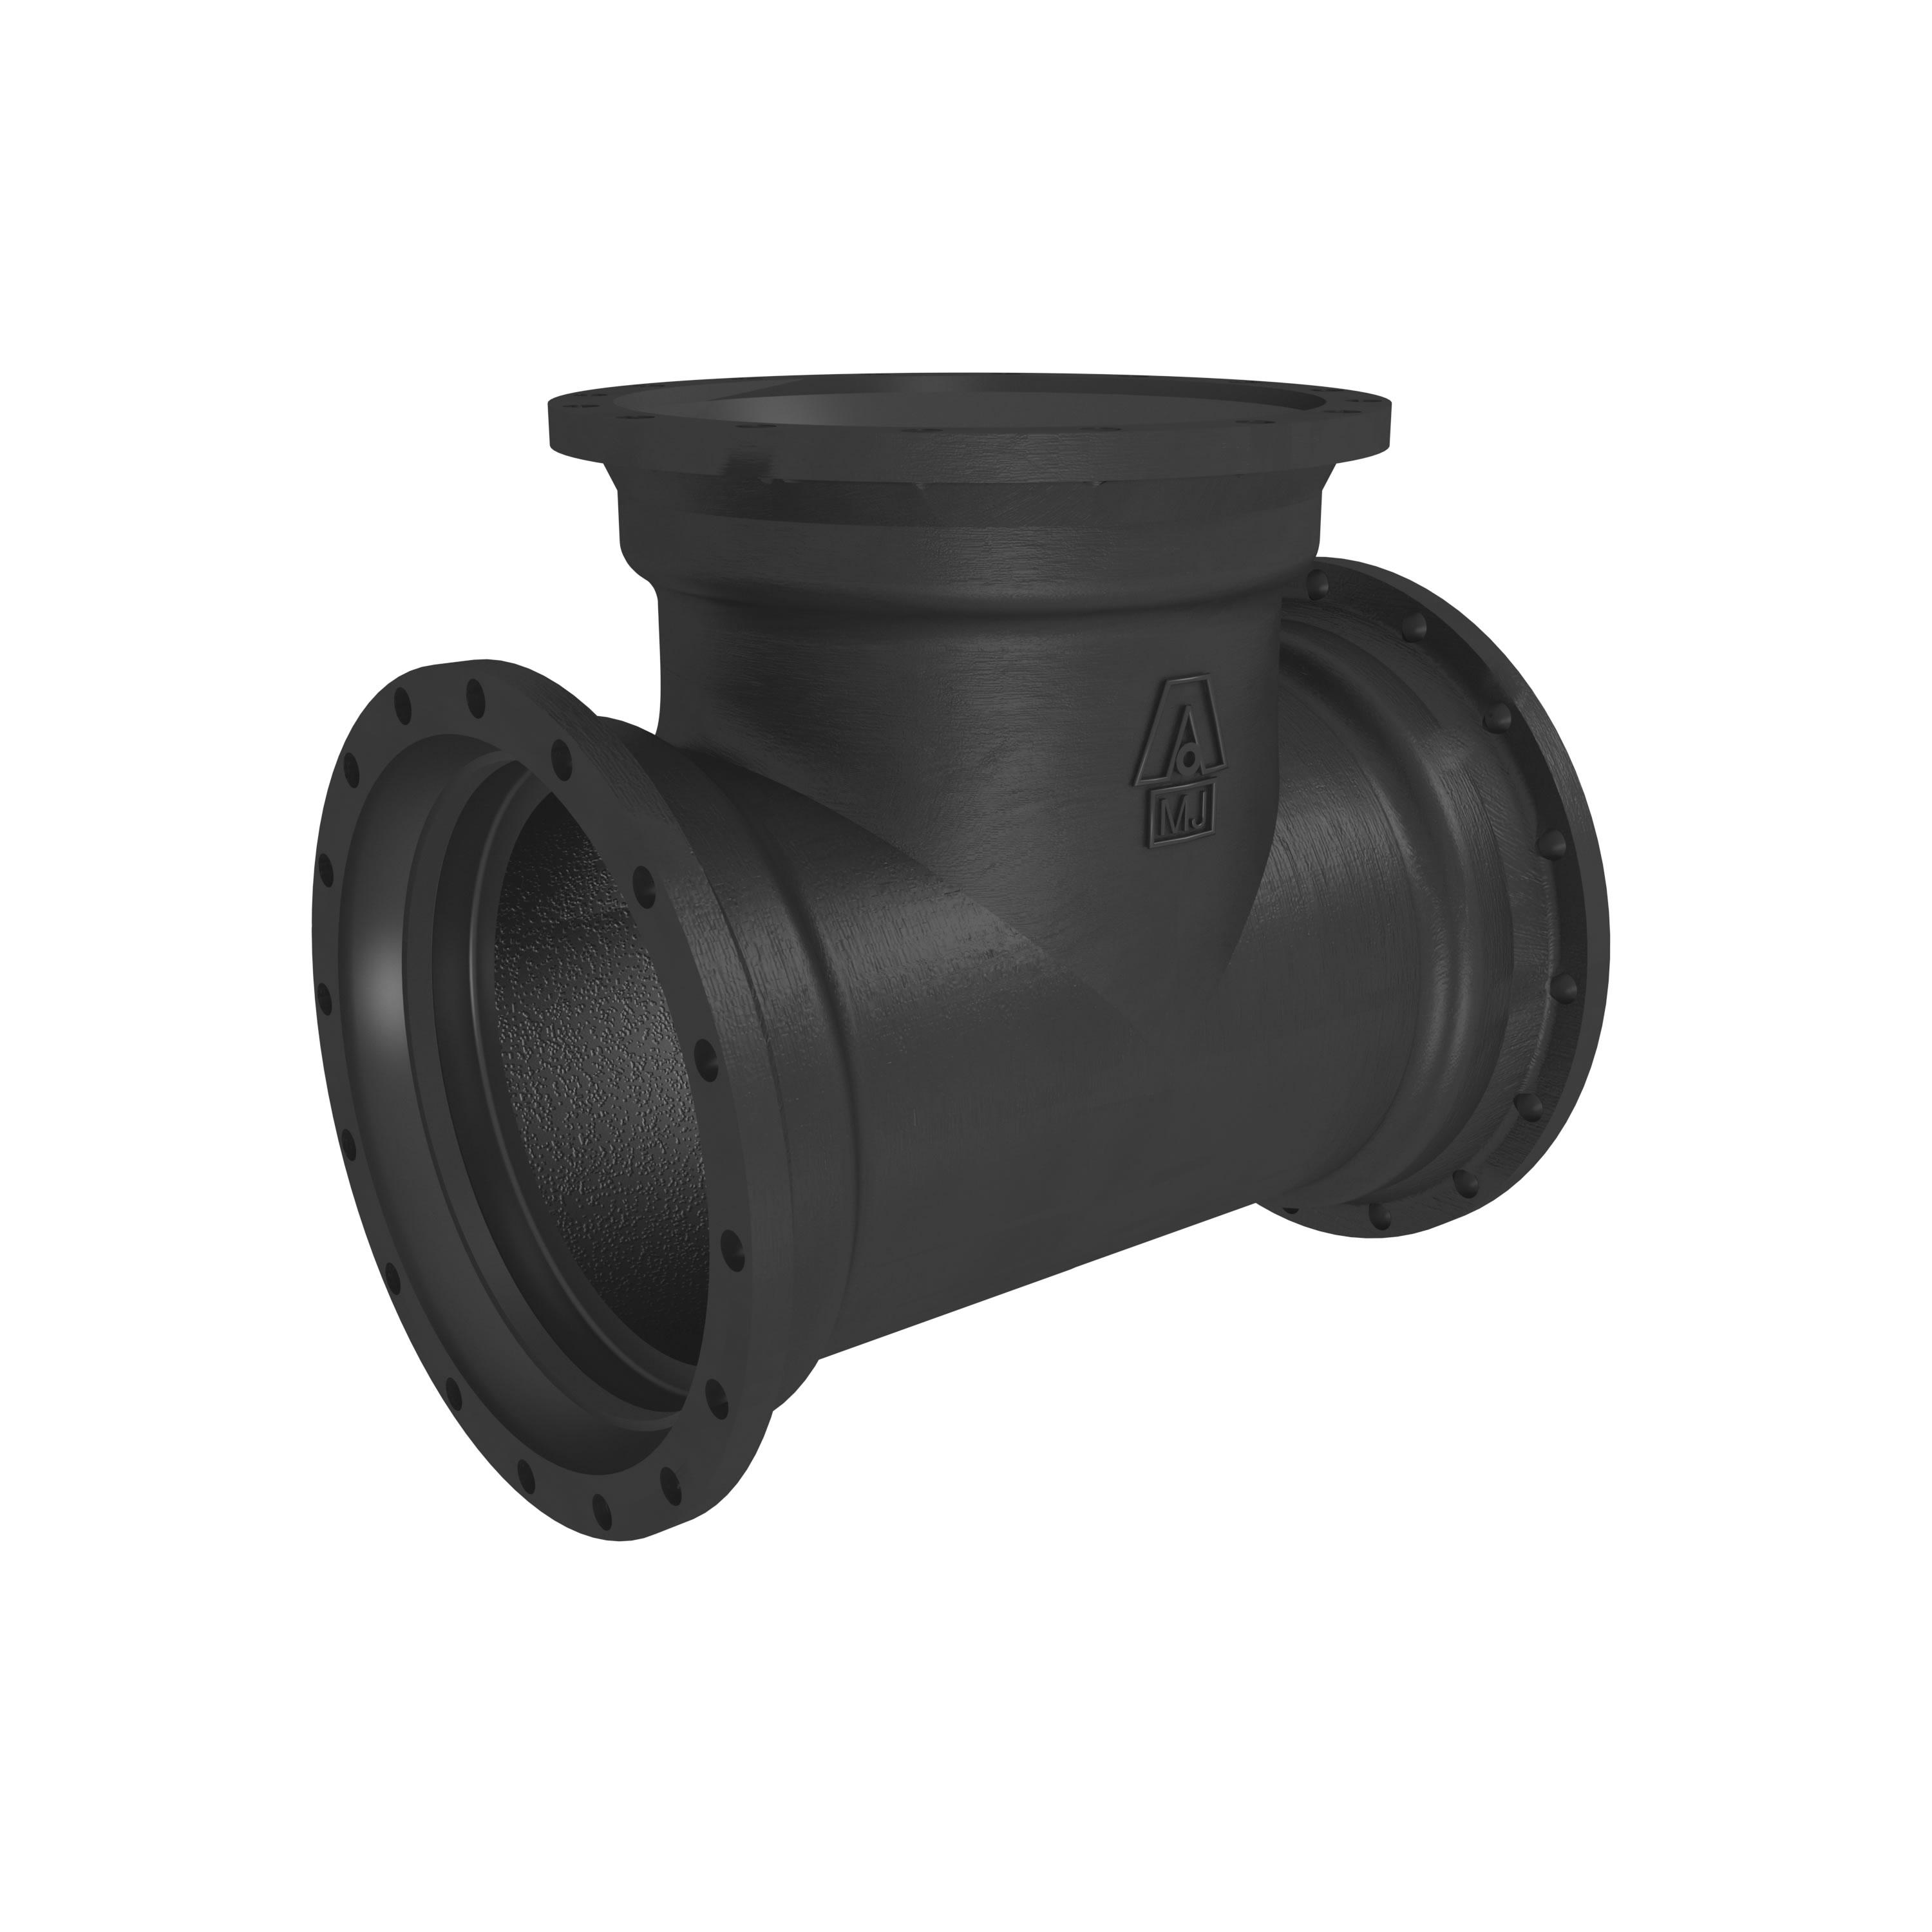 Ductile Iron Fittings Weight Chart